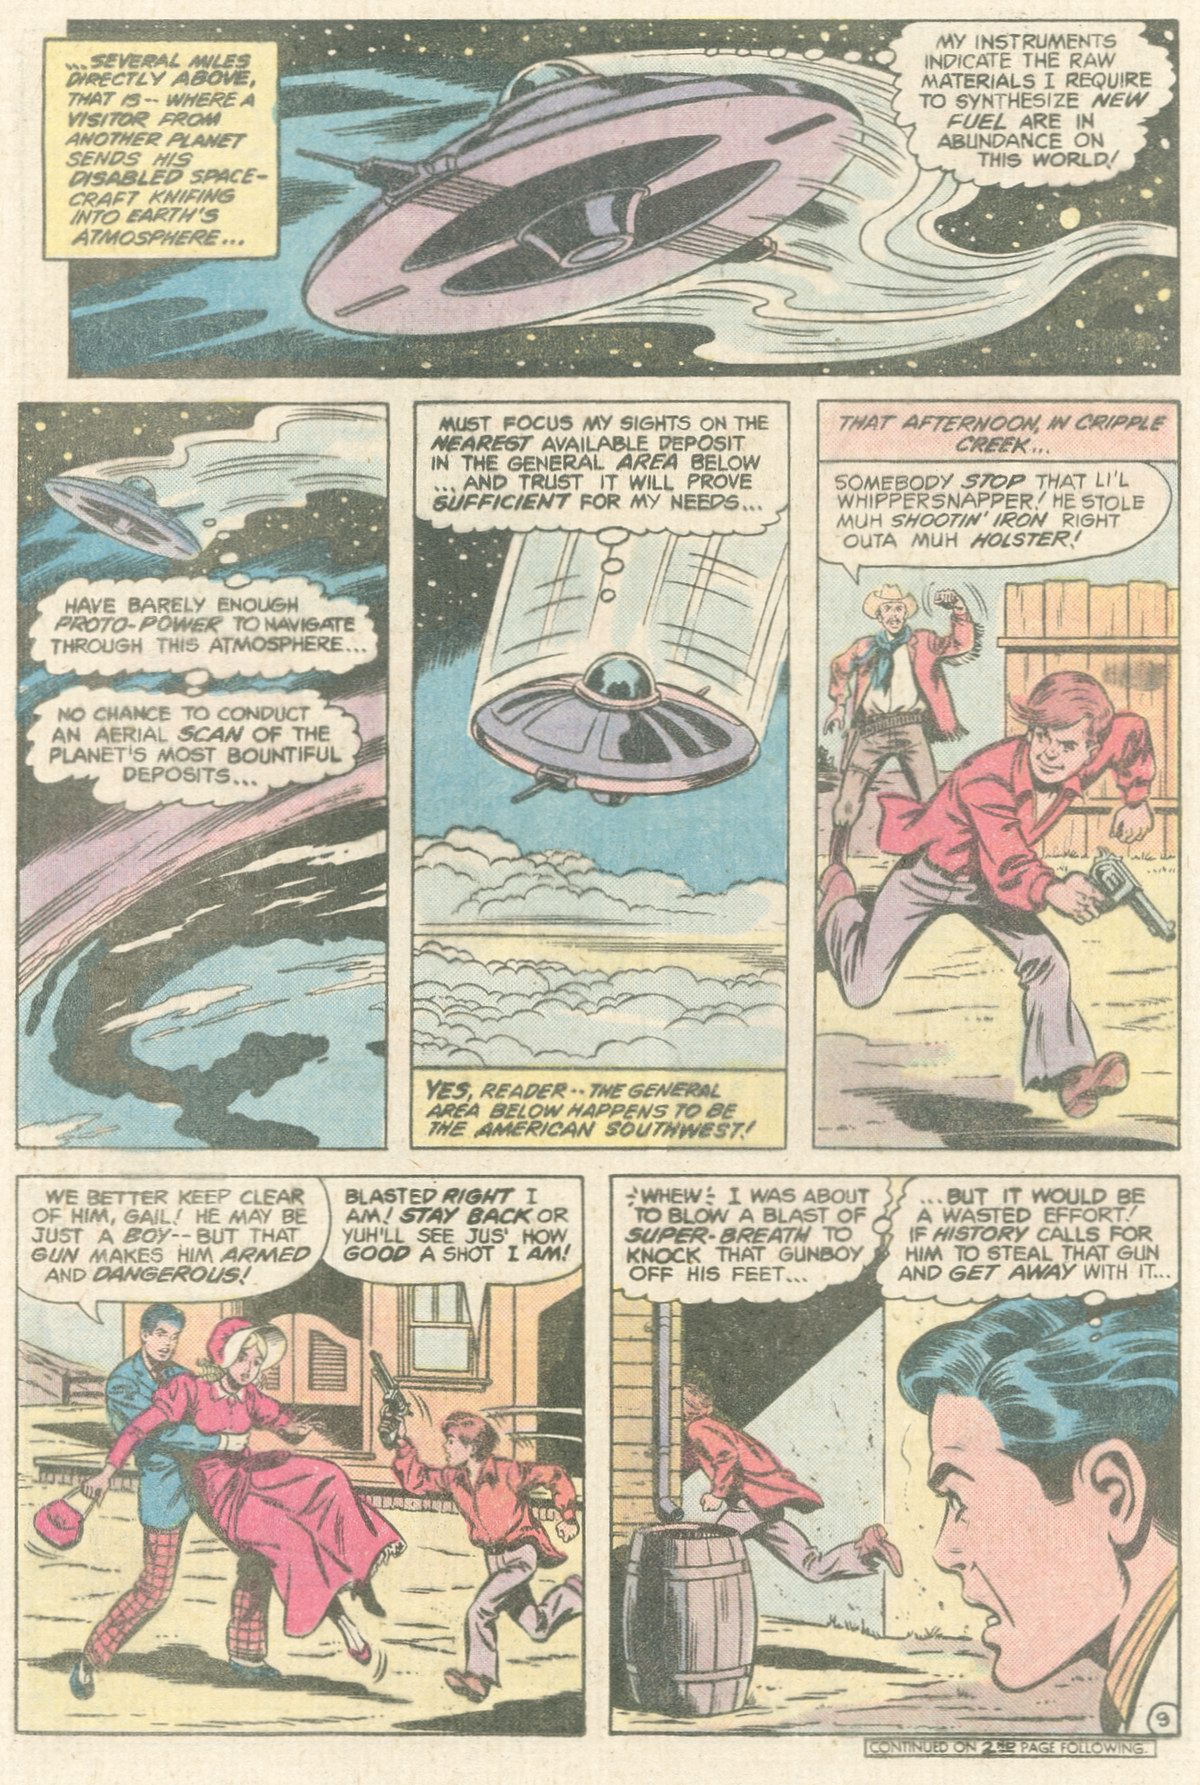 The New Adventures of Superboy 23 Page 9